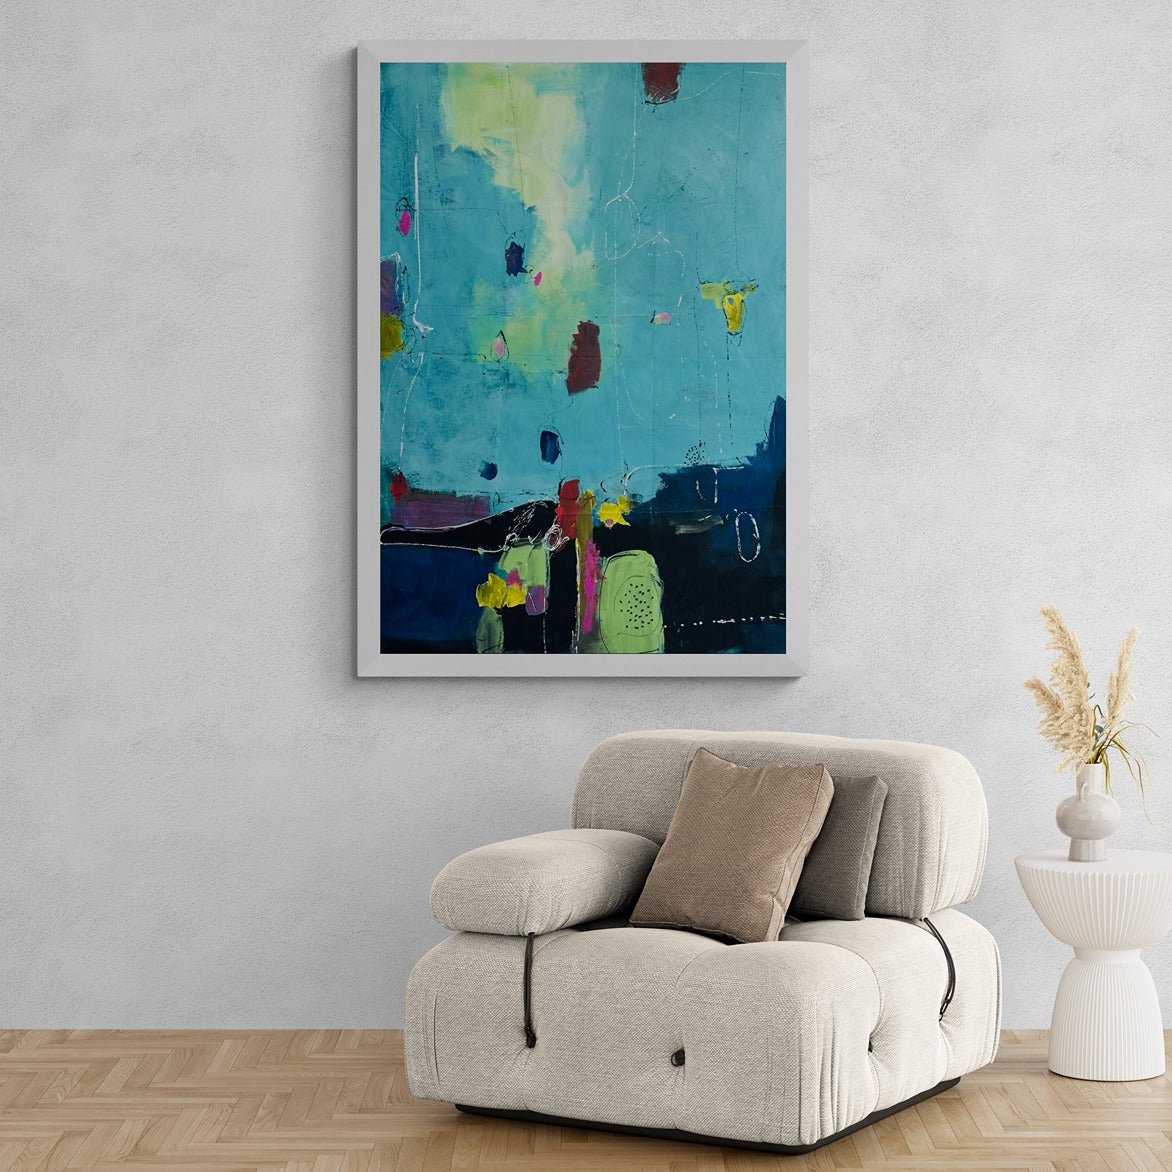 Large original hand-painted canvas abstract wall art accents a comfy modern armchair and side table, infusing artistic elegance into the contemporary decor.